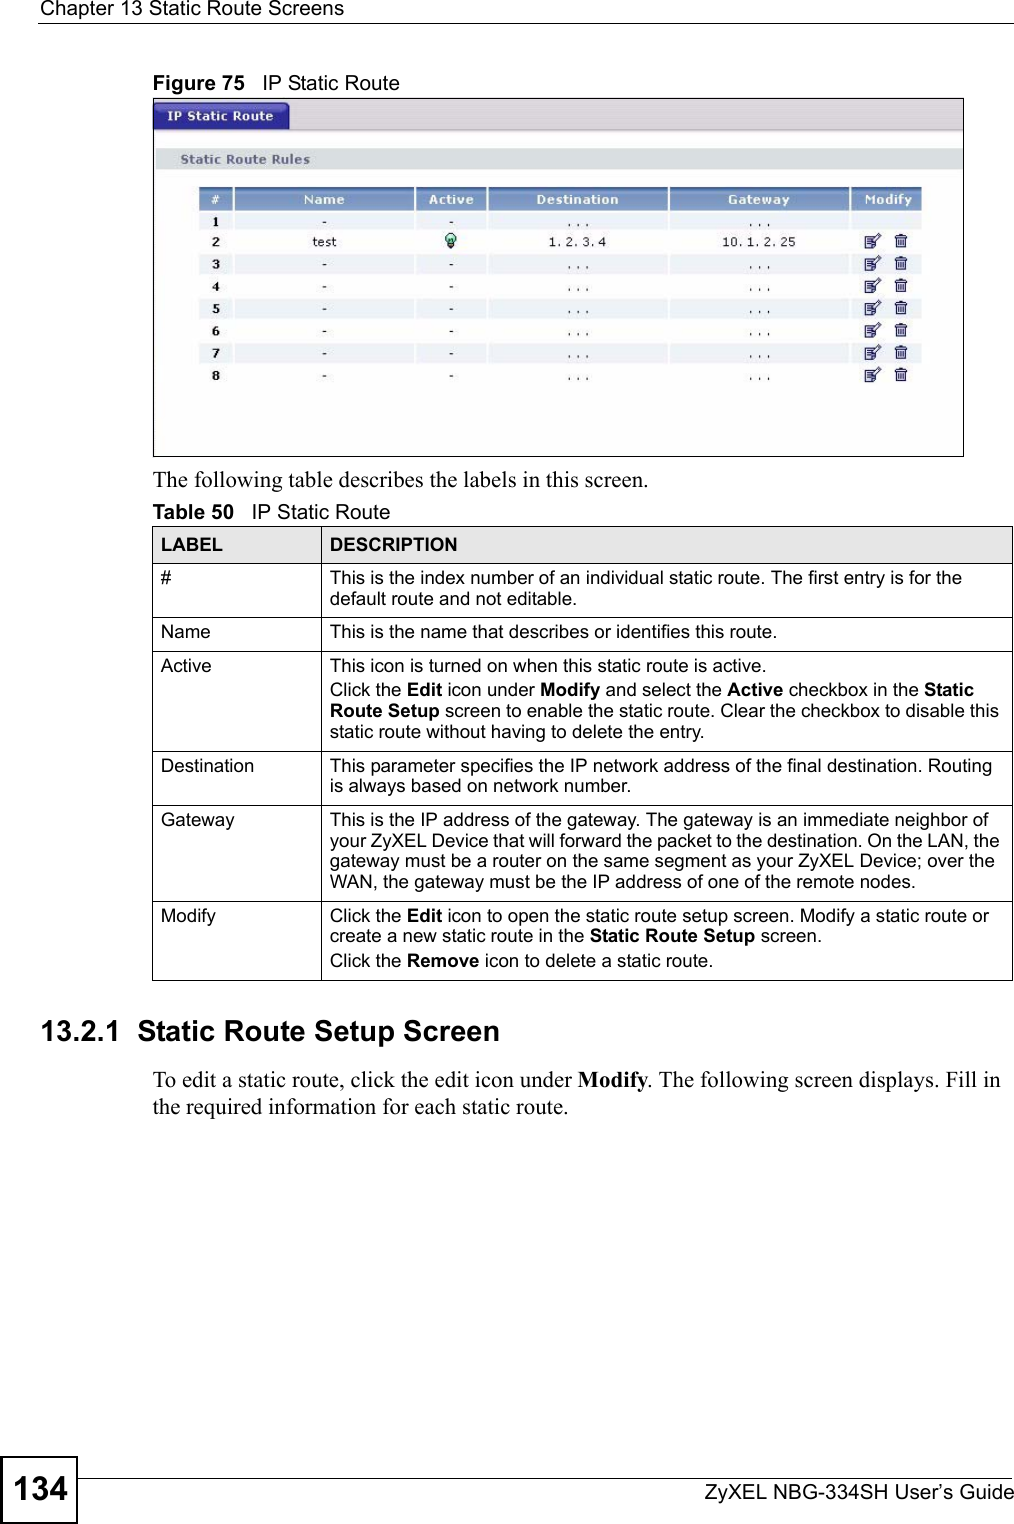 Chapter 13 Static Route ScreensZyXEL NBG-334SH User’s Guide134Figure 75   IP Static RouteThe following table describes the labels in this screen.13.2.1  Static Route Setup Screen   To edit a static route, click the edit icon under Modify. The following screen displays. Fill in the required information for each static route.Table 50   IP Static RouteLABEL DESCRIPTION#This is the index number of an individual static route. The first entry is for the default route and not editable.Name This is the name that describes or identifies this route. Active This icon is turned on when this static route is active.Click the Edit icon under Modify and select the Active checkbox in the Static Route Setup screen to enable the static route. Clear the checkbox to disable this static route without having to delete the entry.Destination This parameter specifies the IP network address of the final destination. Routing is always based on network number. Gateway This is the IP address of the gateway. The gateway is an immediate neighbor of your ZyXEL Device that will forward the packet to the destination. On the LAN, the gateway must be a router on the same segment as your ZyXEL Device; over the WAN, the gateway must be the IP address of one of the remote nodes.Modify Click the Edit icon to open the static route setup screen. Modify a static route or create a new static route in the Static Route Setup screen.Click the Remove icon to delete a static route.